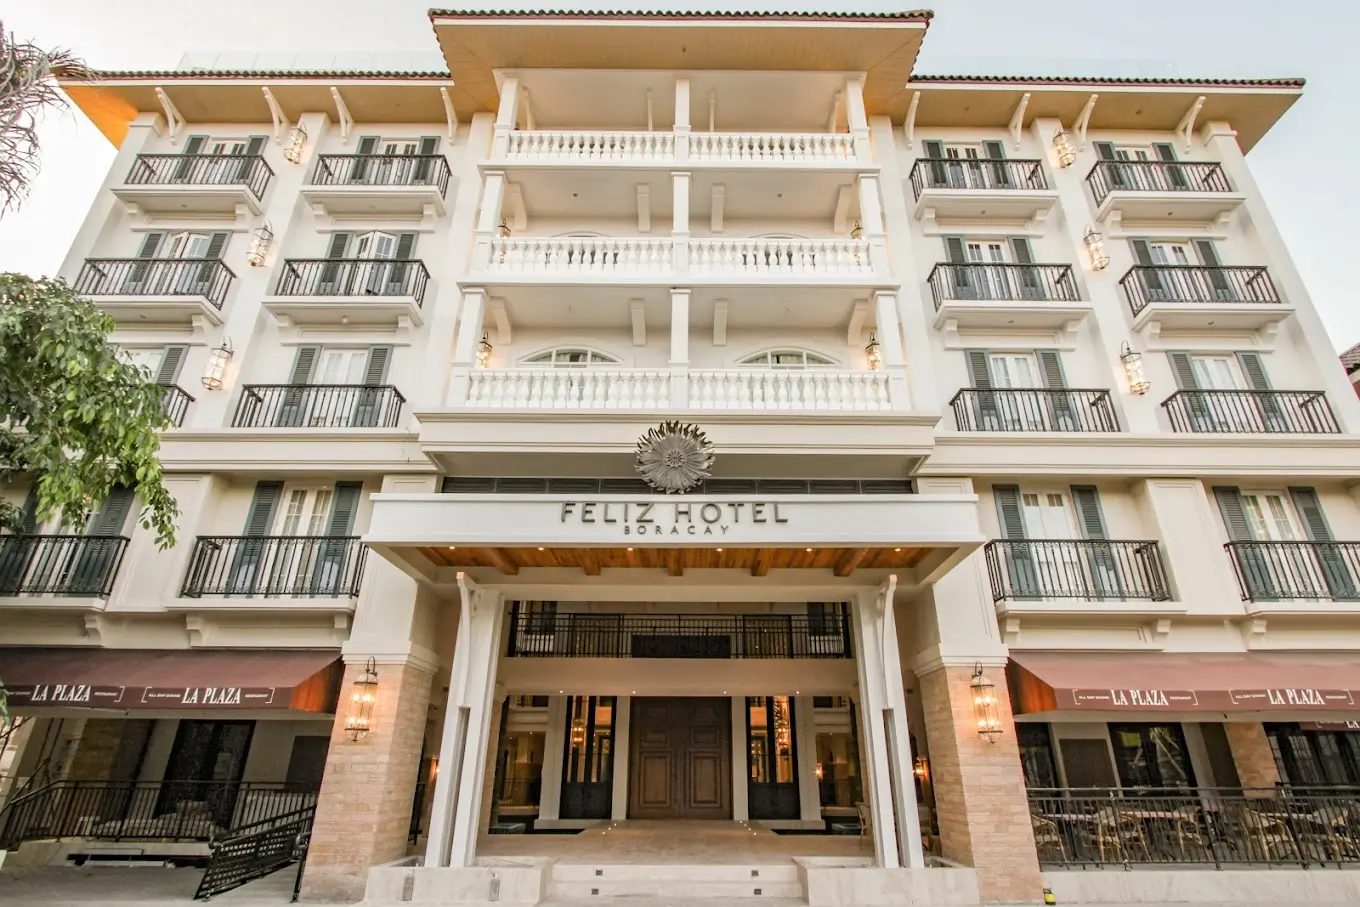 Front view of the elegant Feliz Hotel Boracay, showcasing a grand white facade with multiple balconies and a stately entrance flanked by columns. The hotel's architecture features classic design elements, providing a luxurious and welcoming atmosphere typical of top-tier boutique hotels in Boracay.